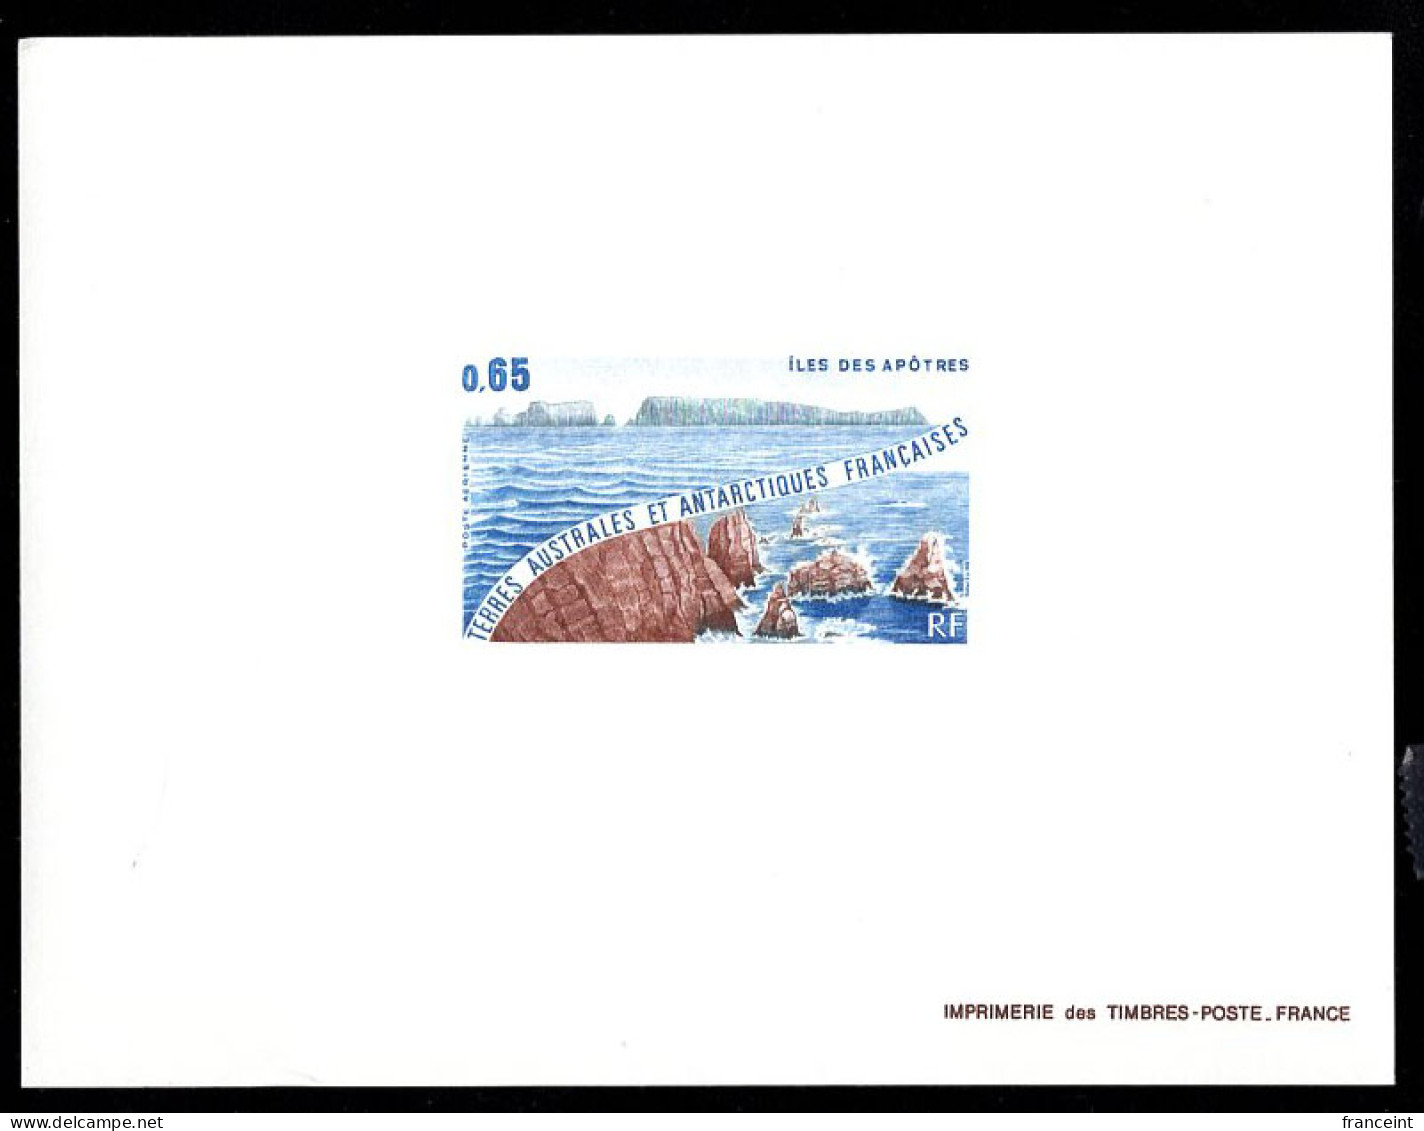 F.S.A.T.(1983) Apostle Islands. Deluxe Sheet. Scott No C72, Yvert No PA73. - Imperforates, Proofs & Errors